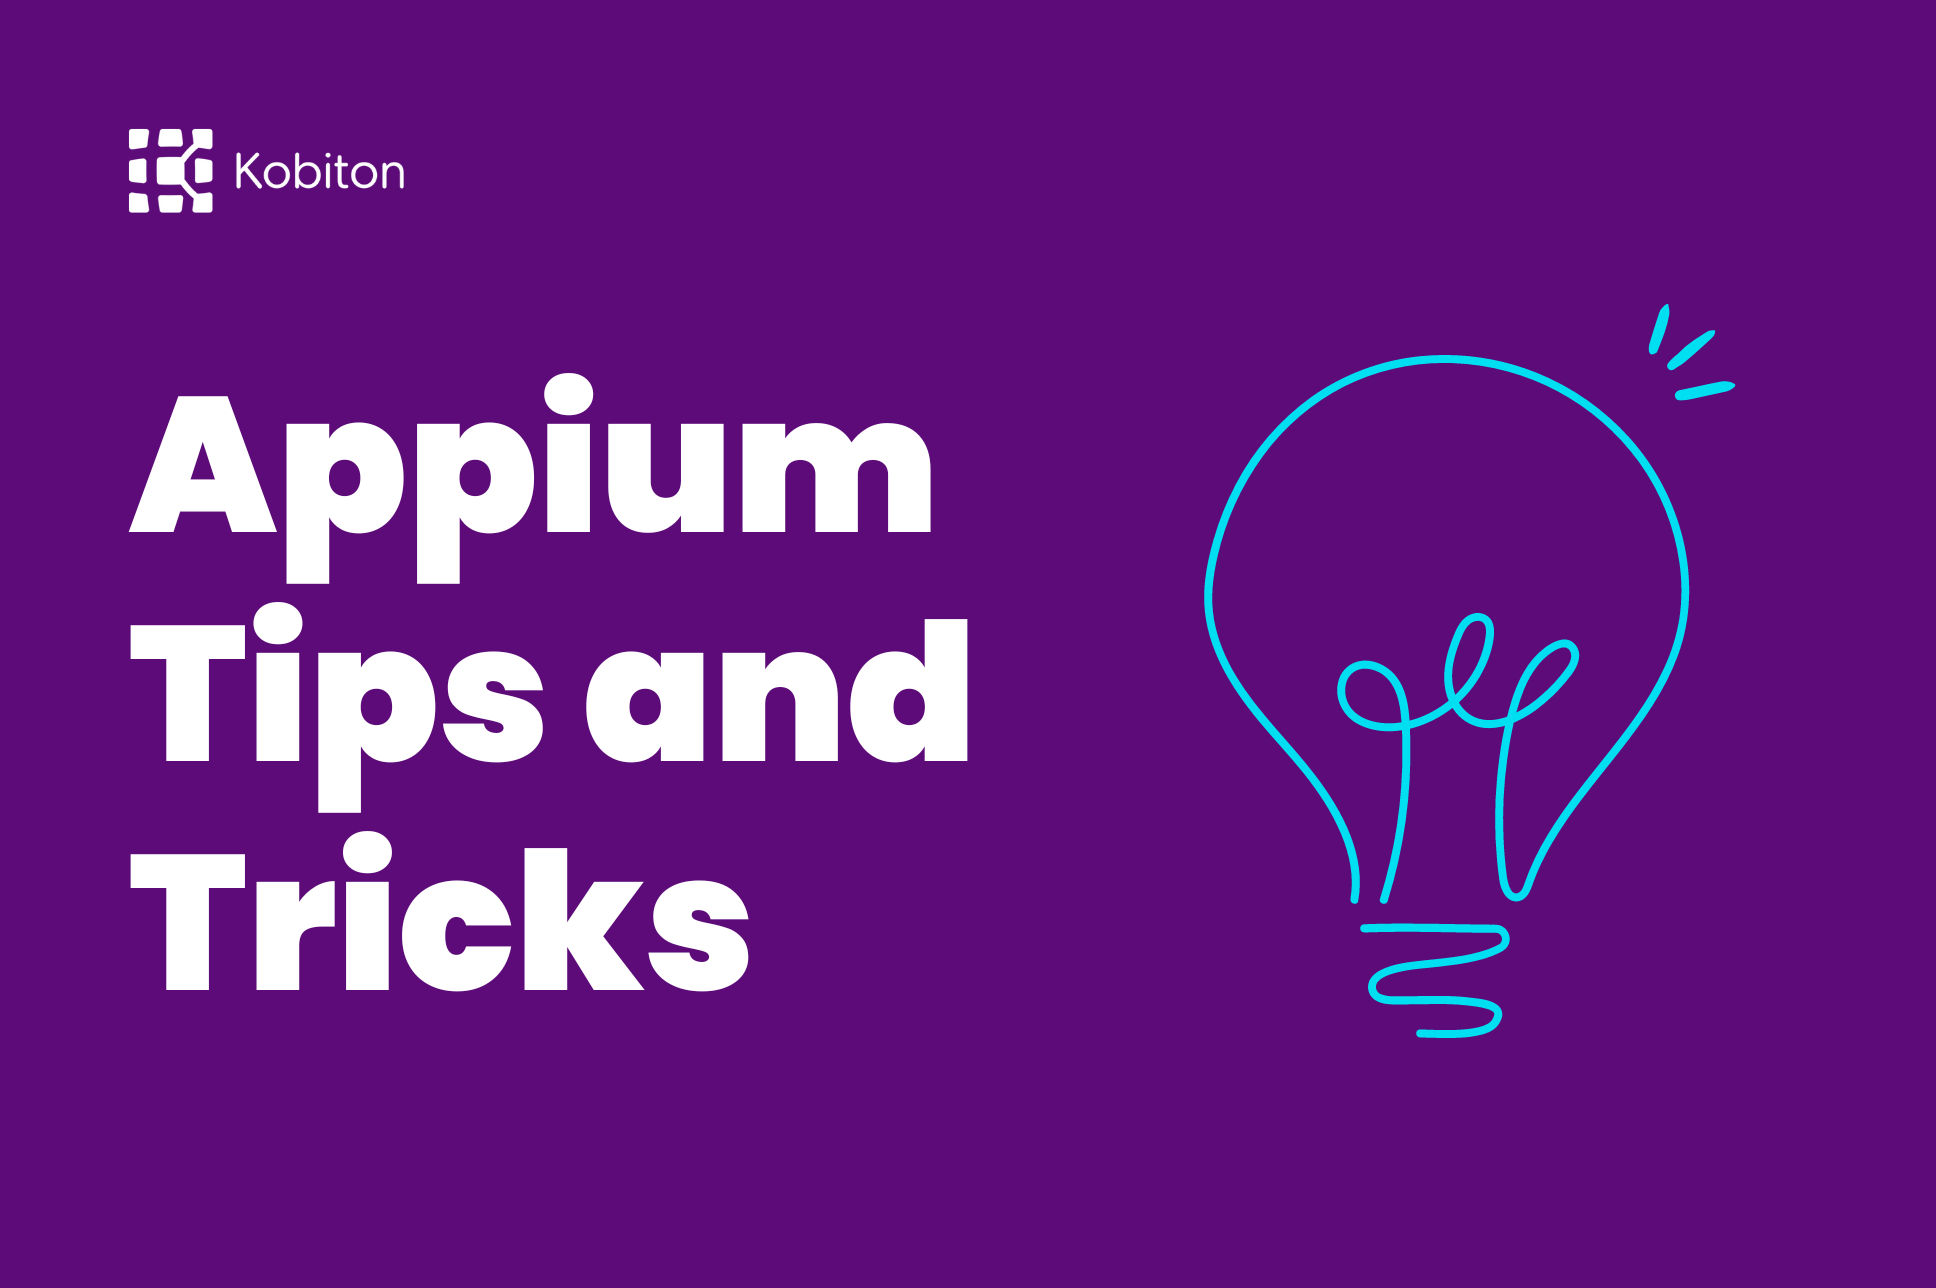 Appium Tips and Tricks